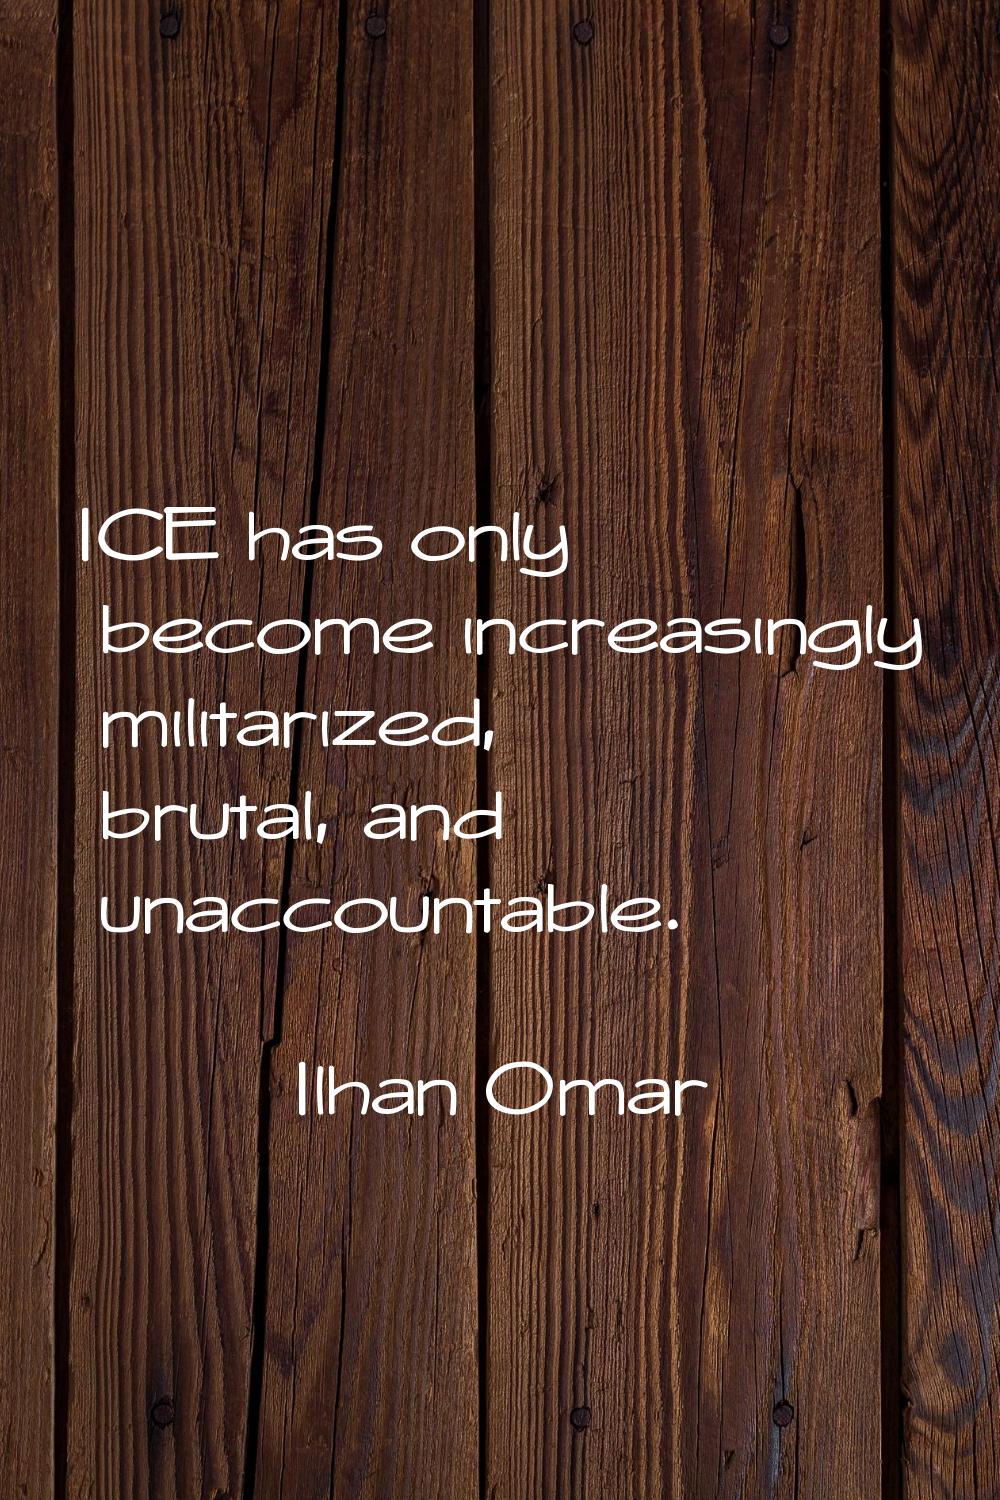 ICE has only become increasingly militarized, brutal, and unaccountable.